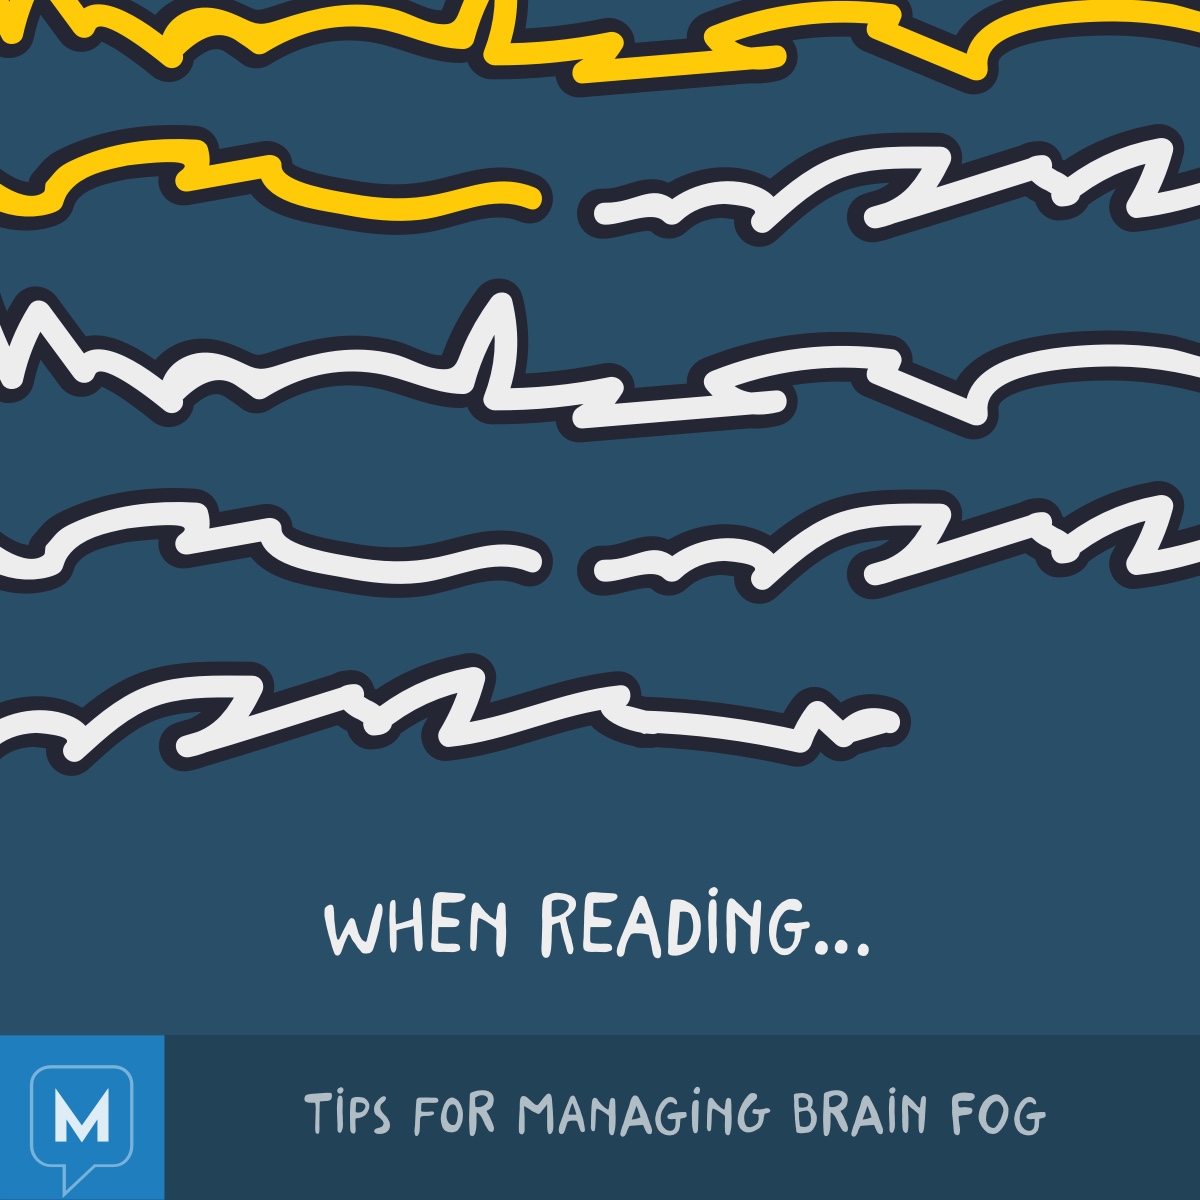 When reading